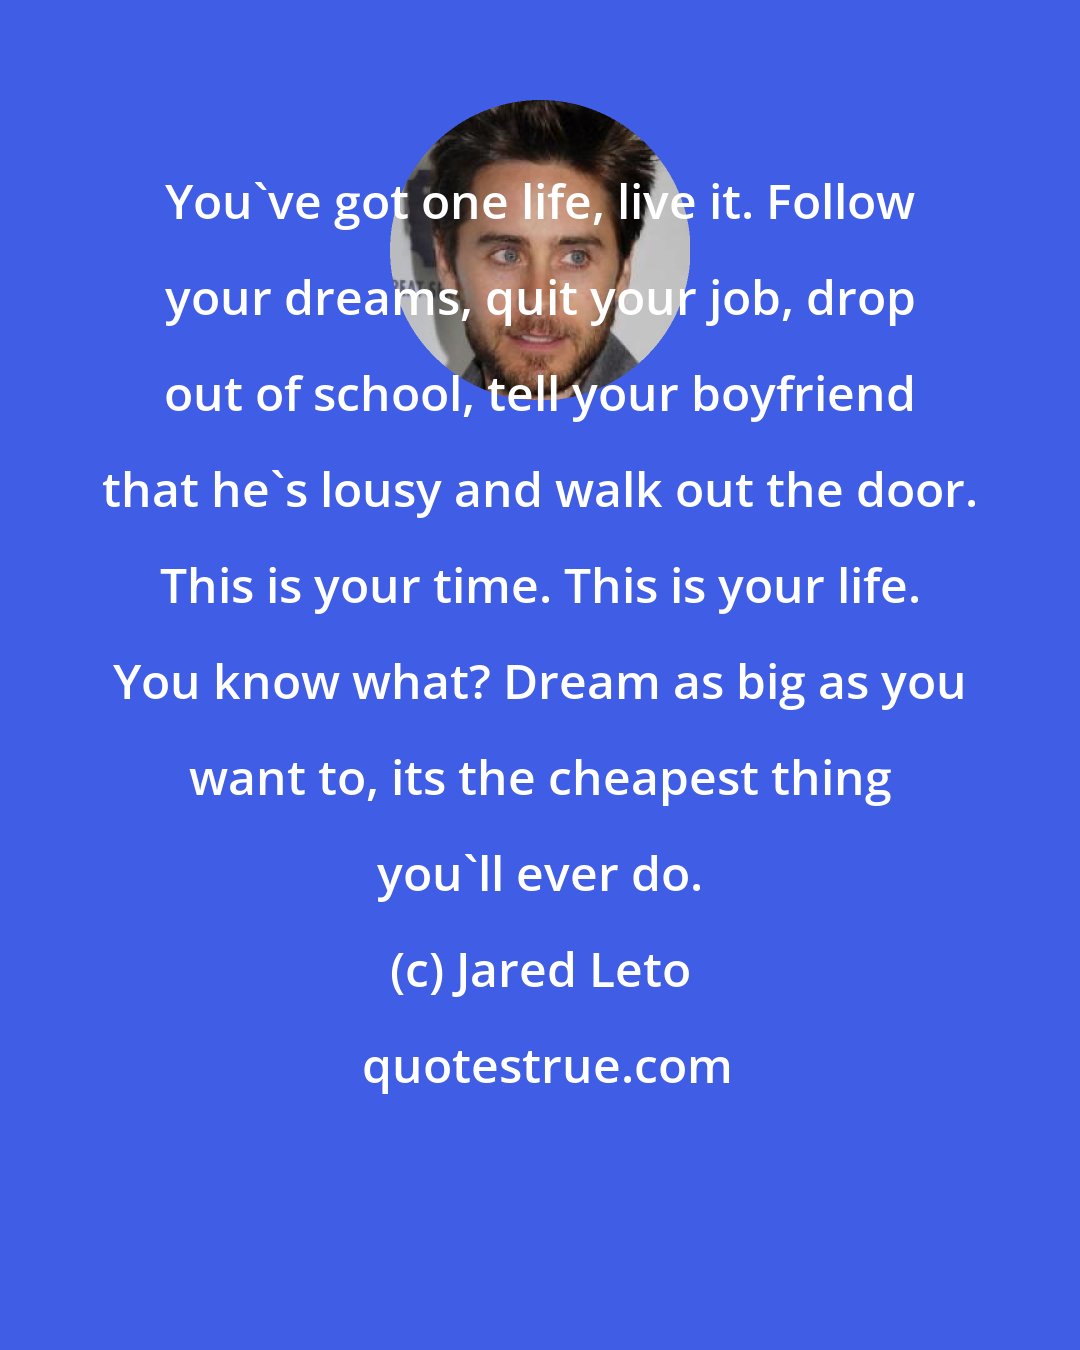 Jared Leto: You've got one life, live it. Follow your dreams, quit your job, drop out of school, tell your boyfriend that he's lousy and walk out the door. This is your time. This is your life. You know what? Dream as big as you want to, its the cheapest thing you'll ever do.